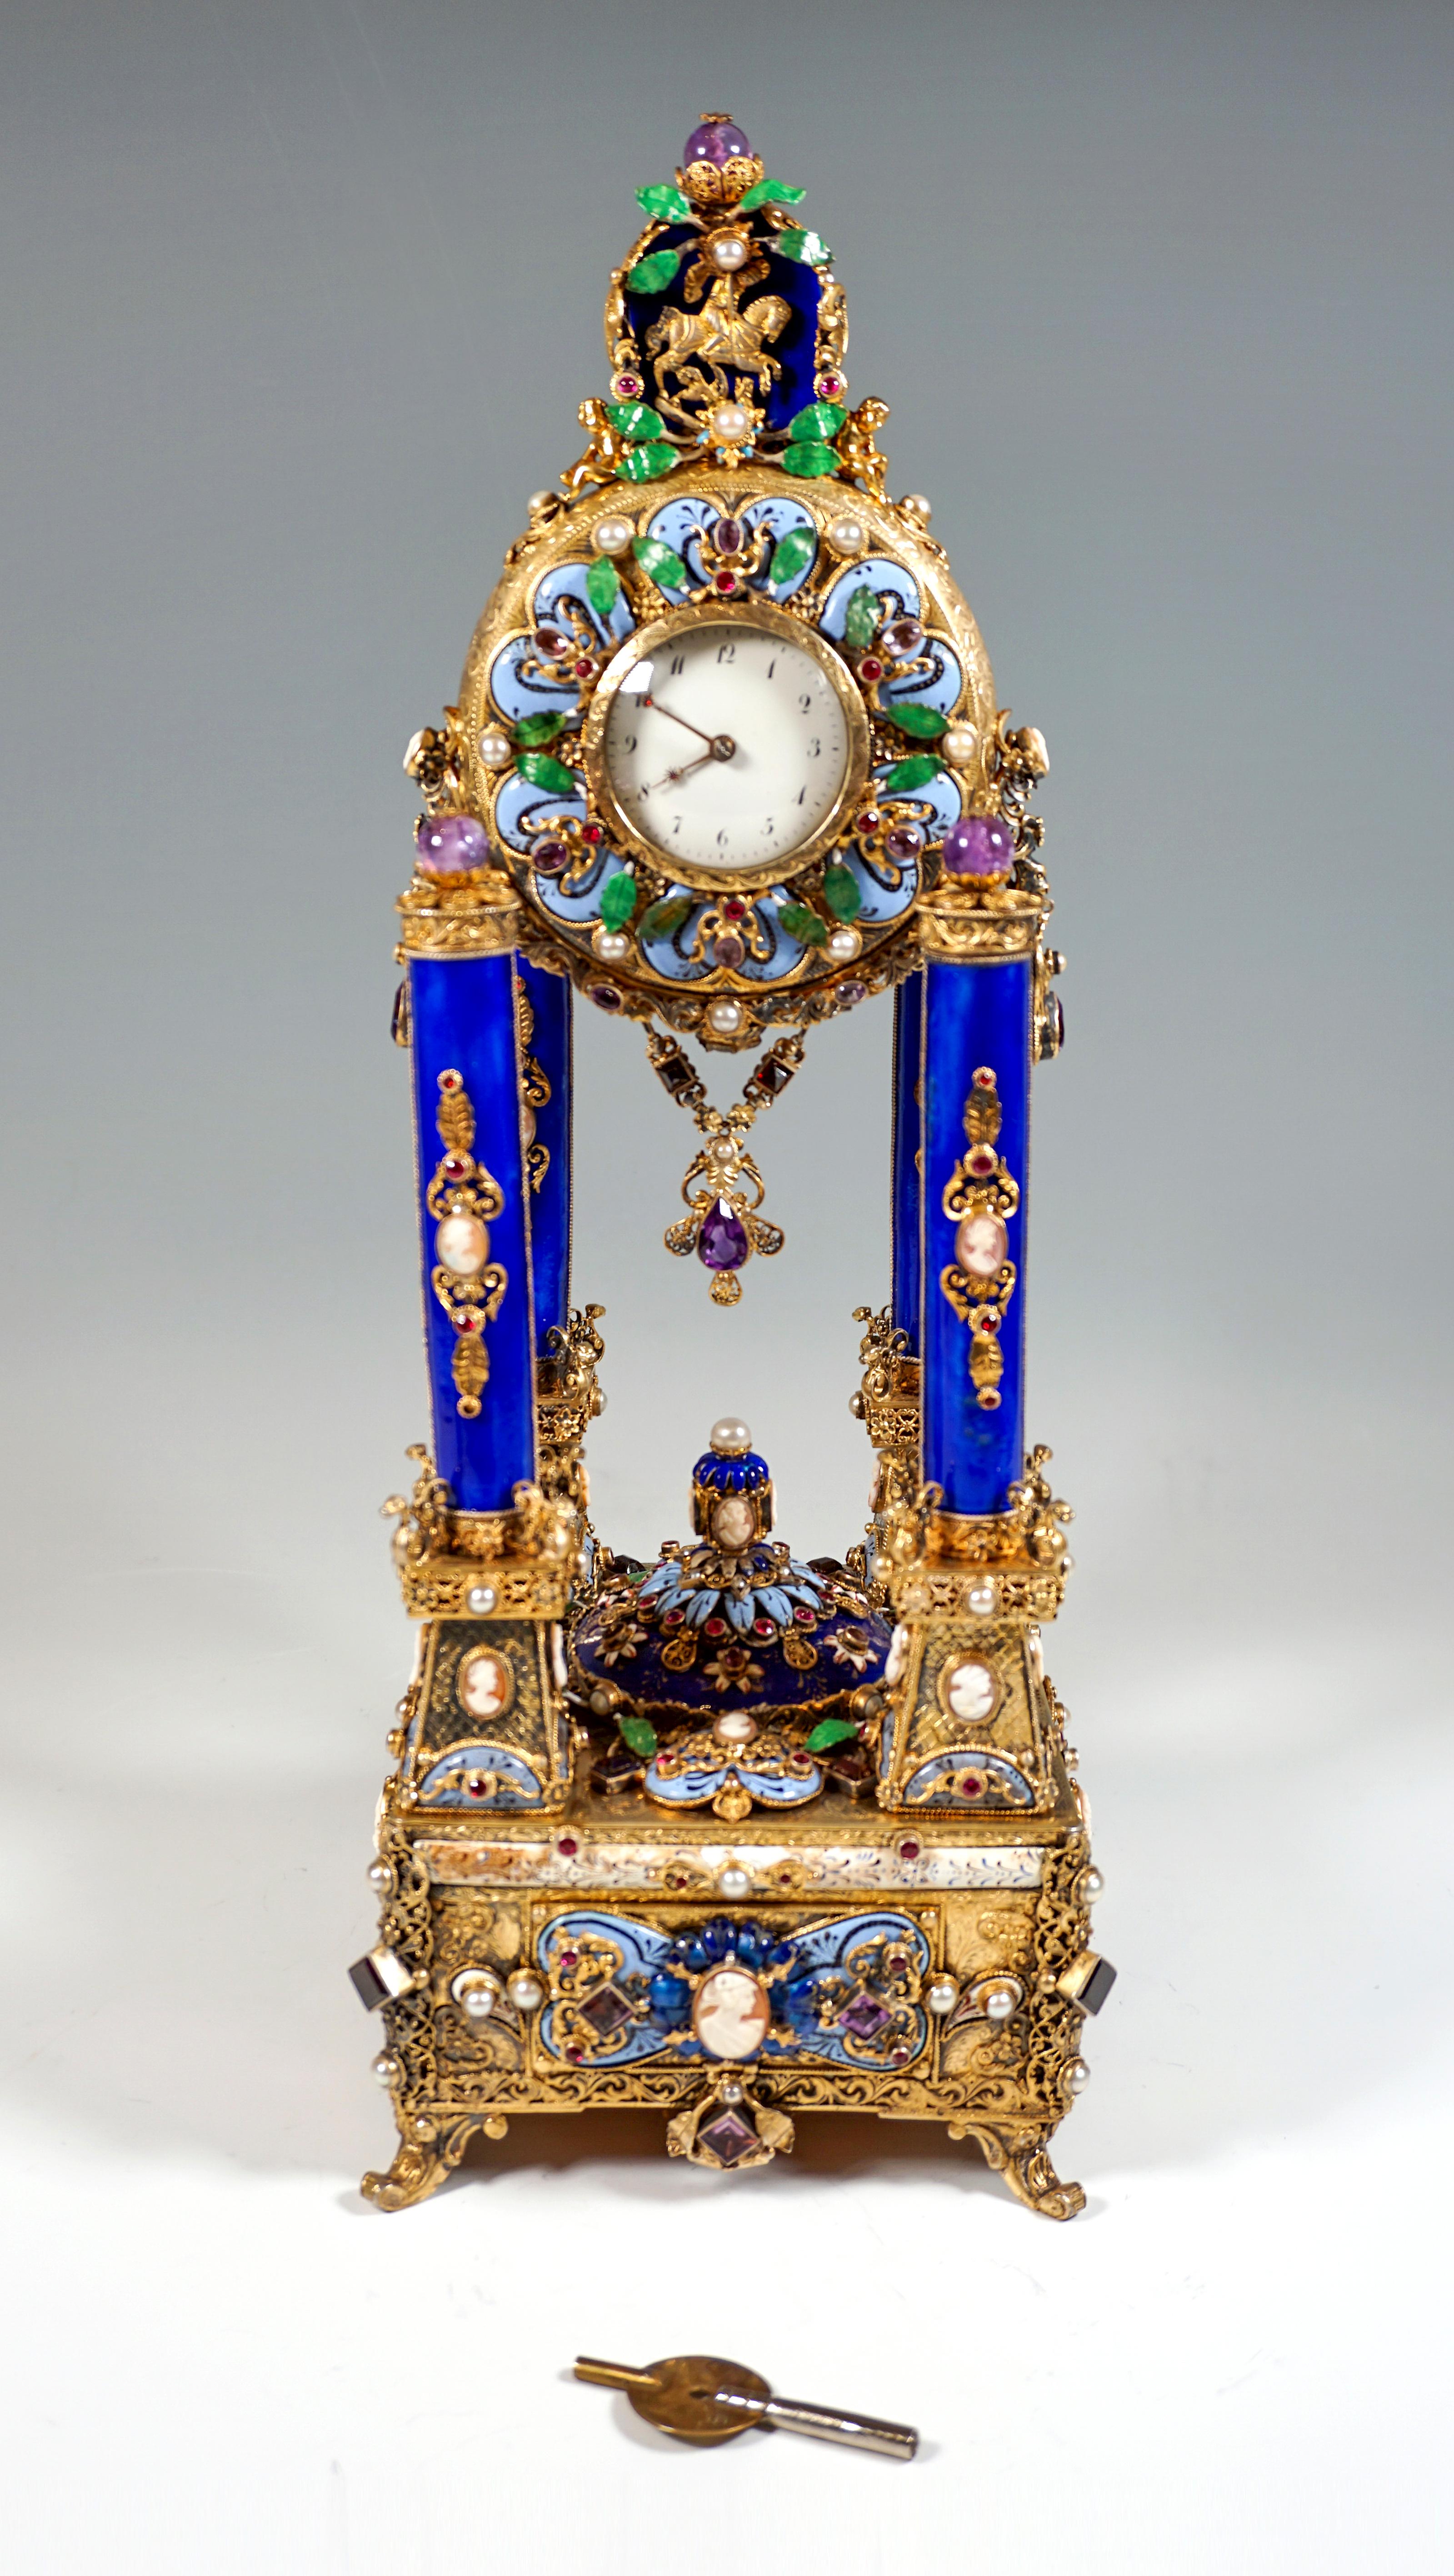 Viennese Silver Historicism Splendour Clock with Musical Movement, Around 1880 For Sale 9